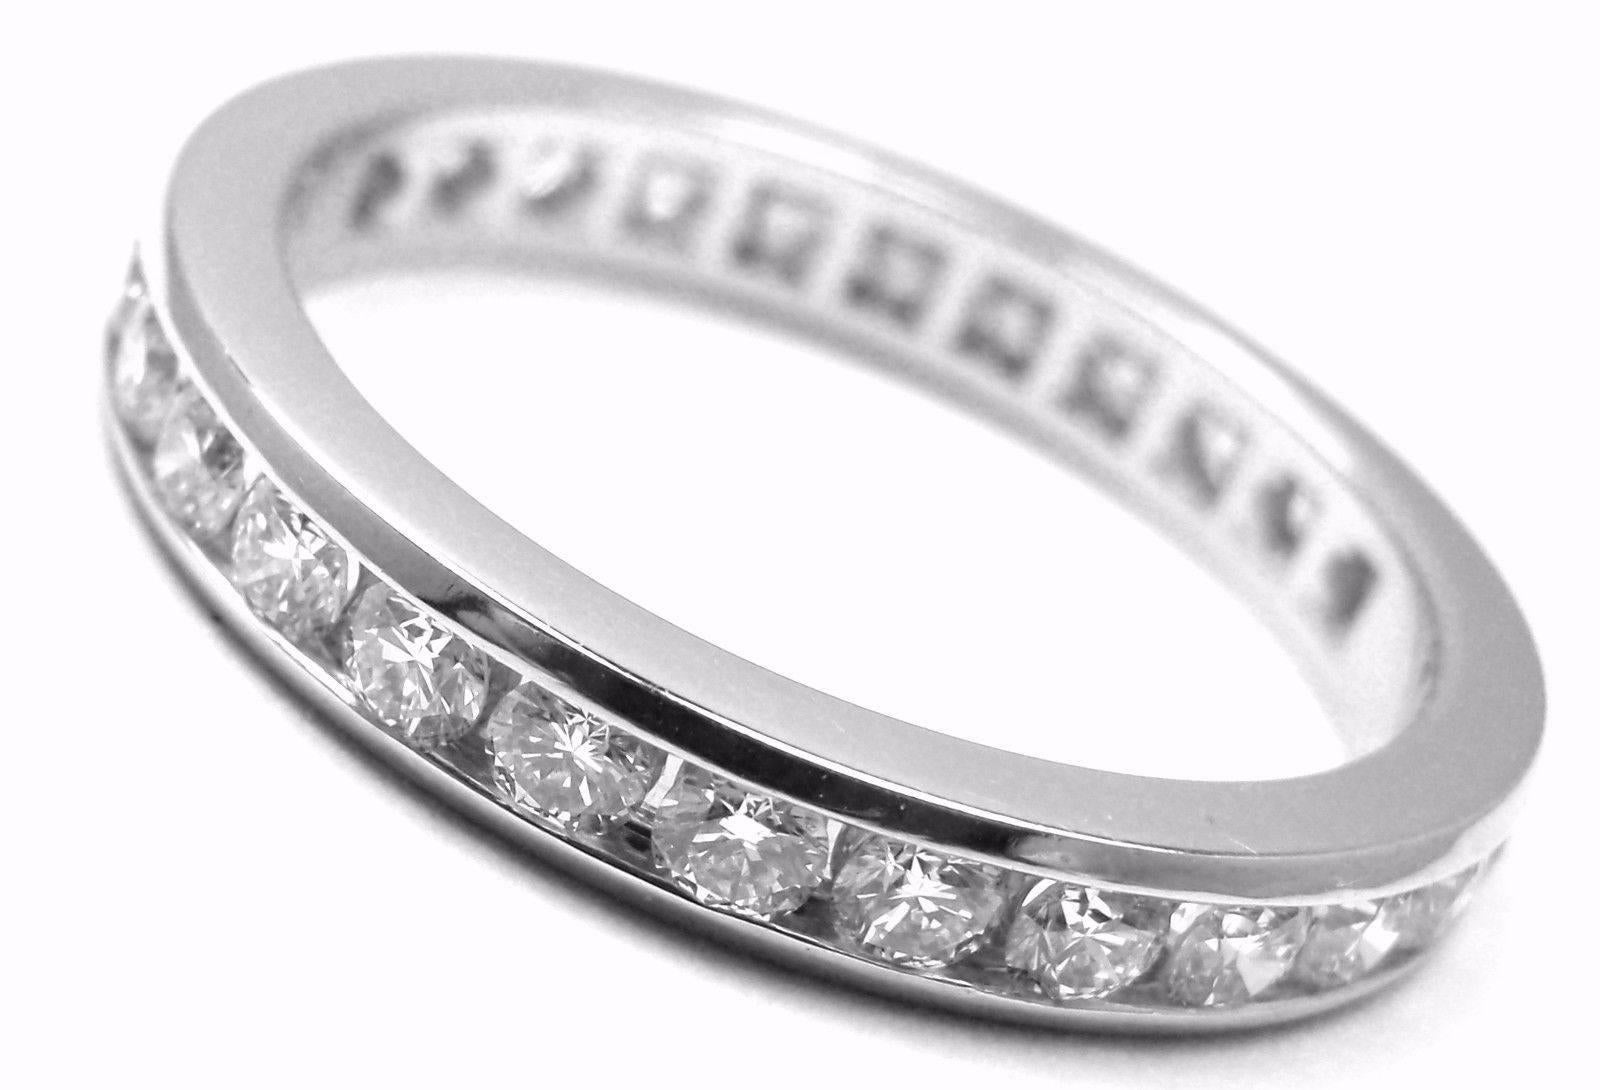 Tiffany & Co Platinum Diamond Full Circle 3mm Band Ring.
With Round brilliant cut diamonds VS1 clarity, E color total weight approx. 1ct

Measurements:
Ring Size: 7.5
Weight: 4.8 grams
Band Width: 3mm
Stamped Hallmarks: Tiffany & Co. PT950
*